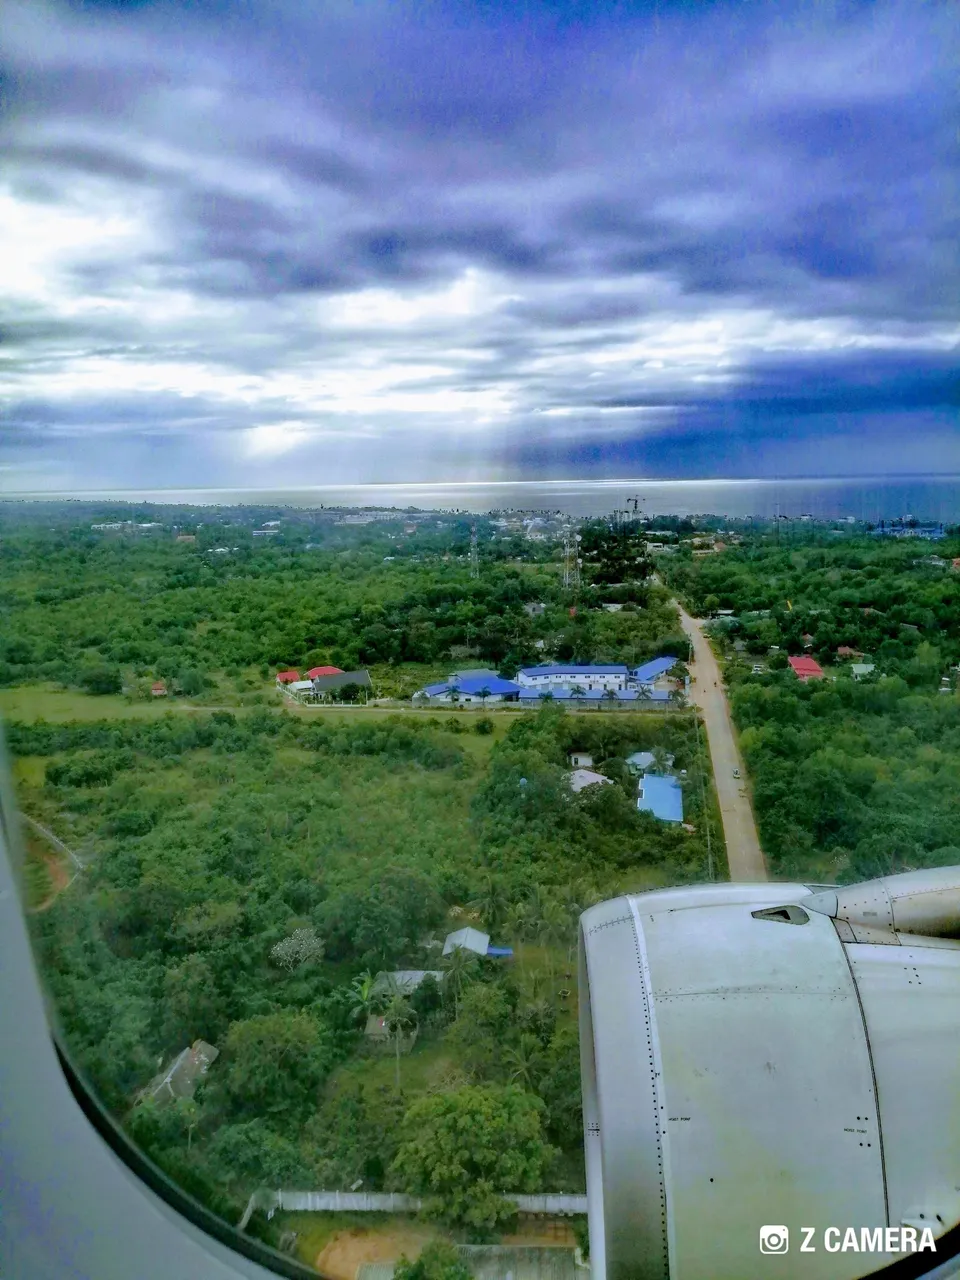 Before coming across our town, you have to be in Panglao International first if you are on board an airplane. Panglao has the very best Beach Resort The Bohol Beach Club and many more latest beaches I never know yet.